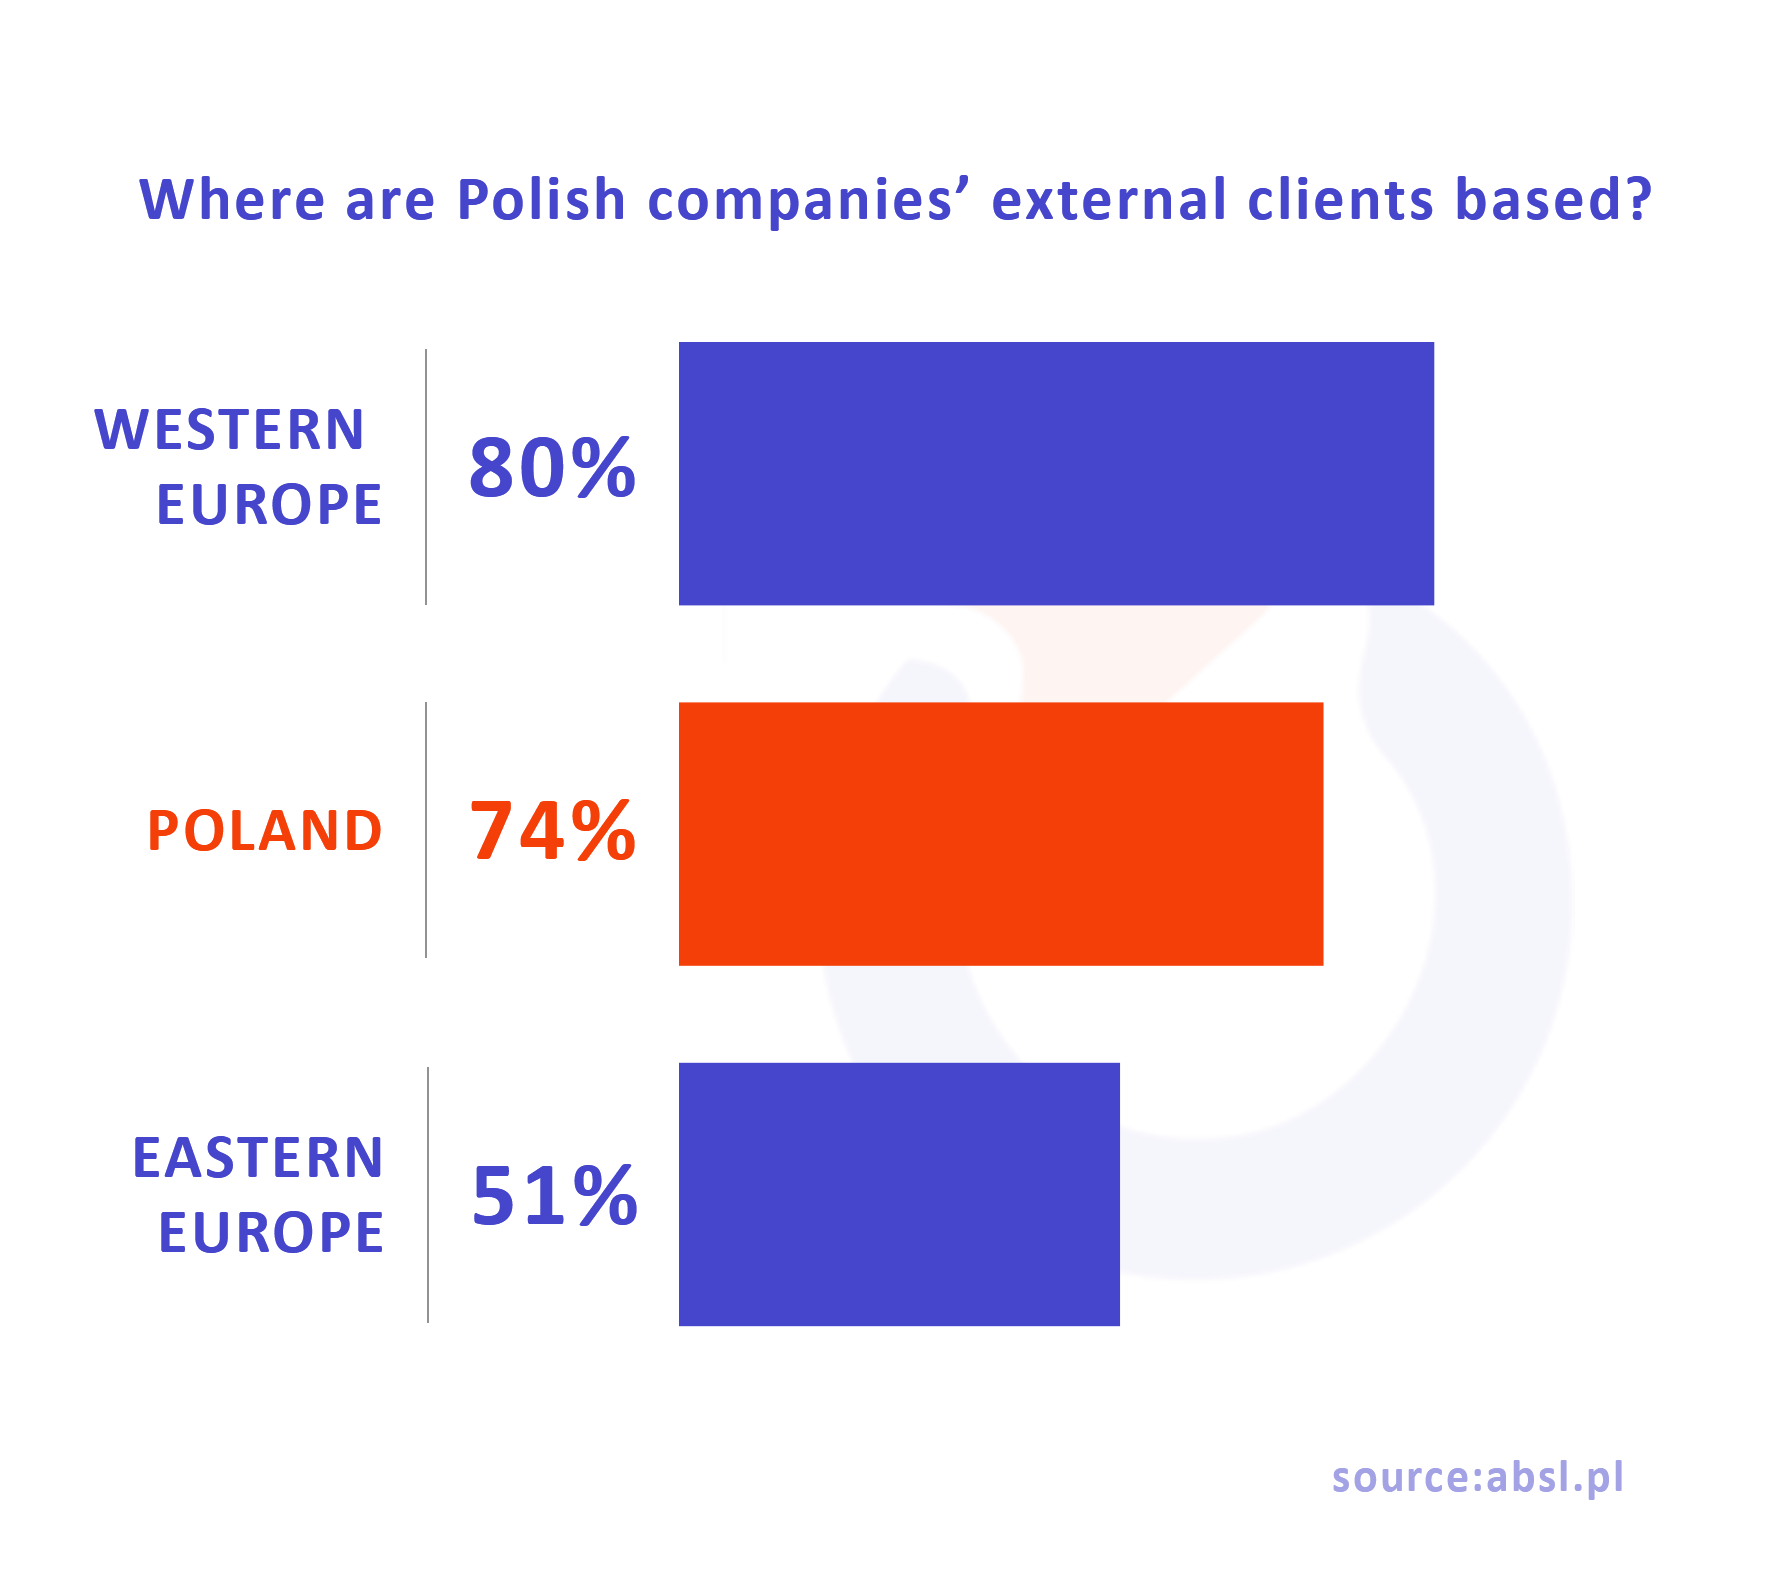 POLISH IT COMPANIES HAVE EXPERIENCE IN COLLABORATING WITH FOREIGN BUSINESSES 